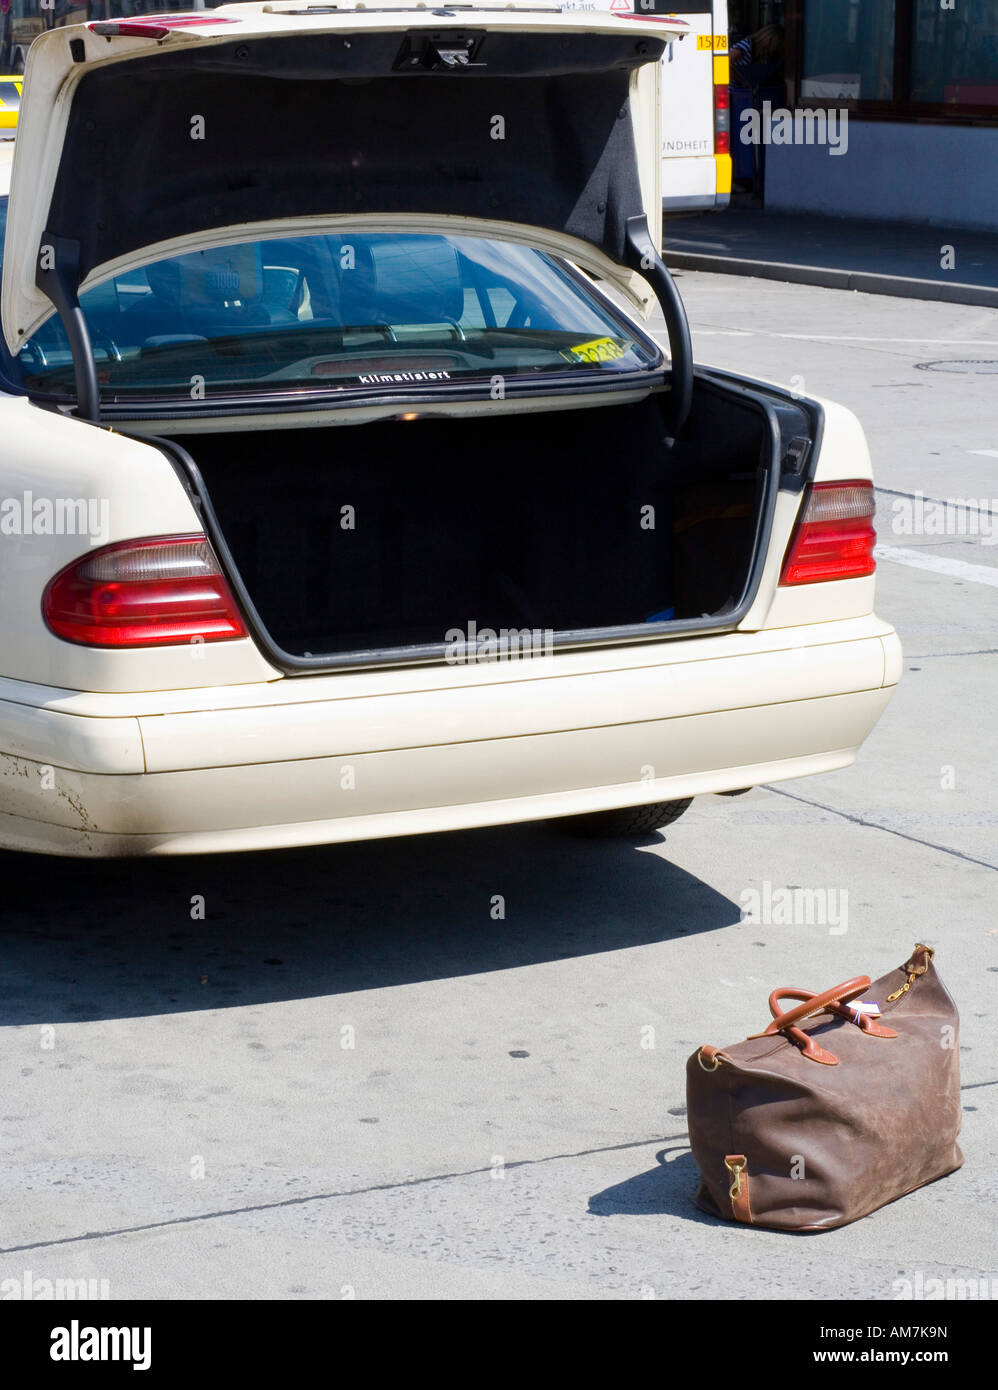 Travel baggage, open car trunk Stock Photo